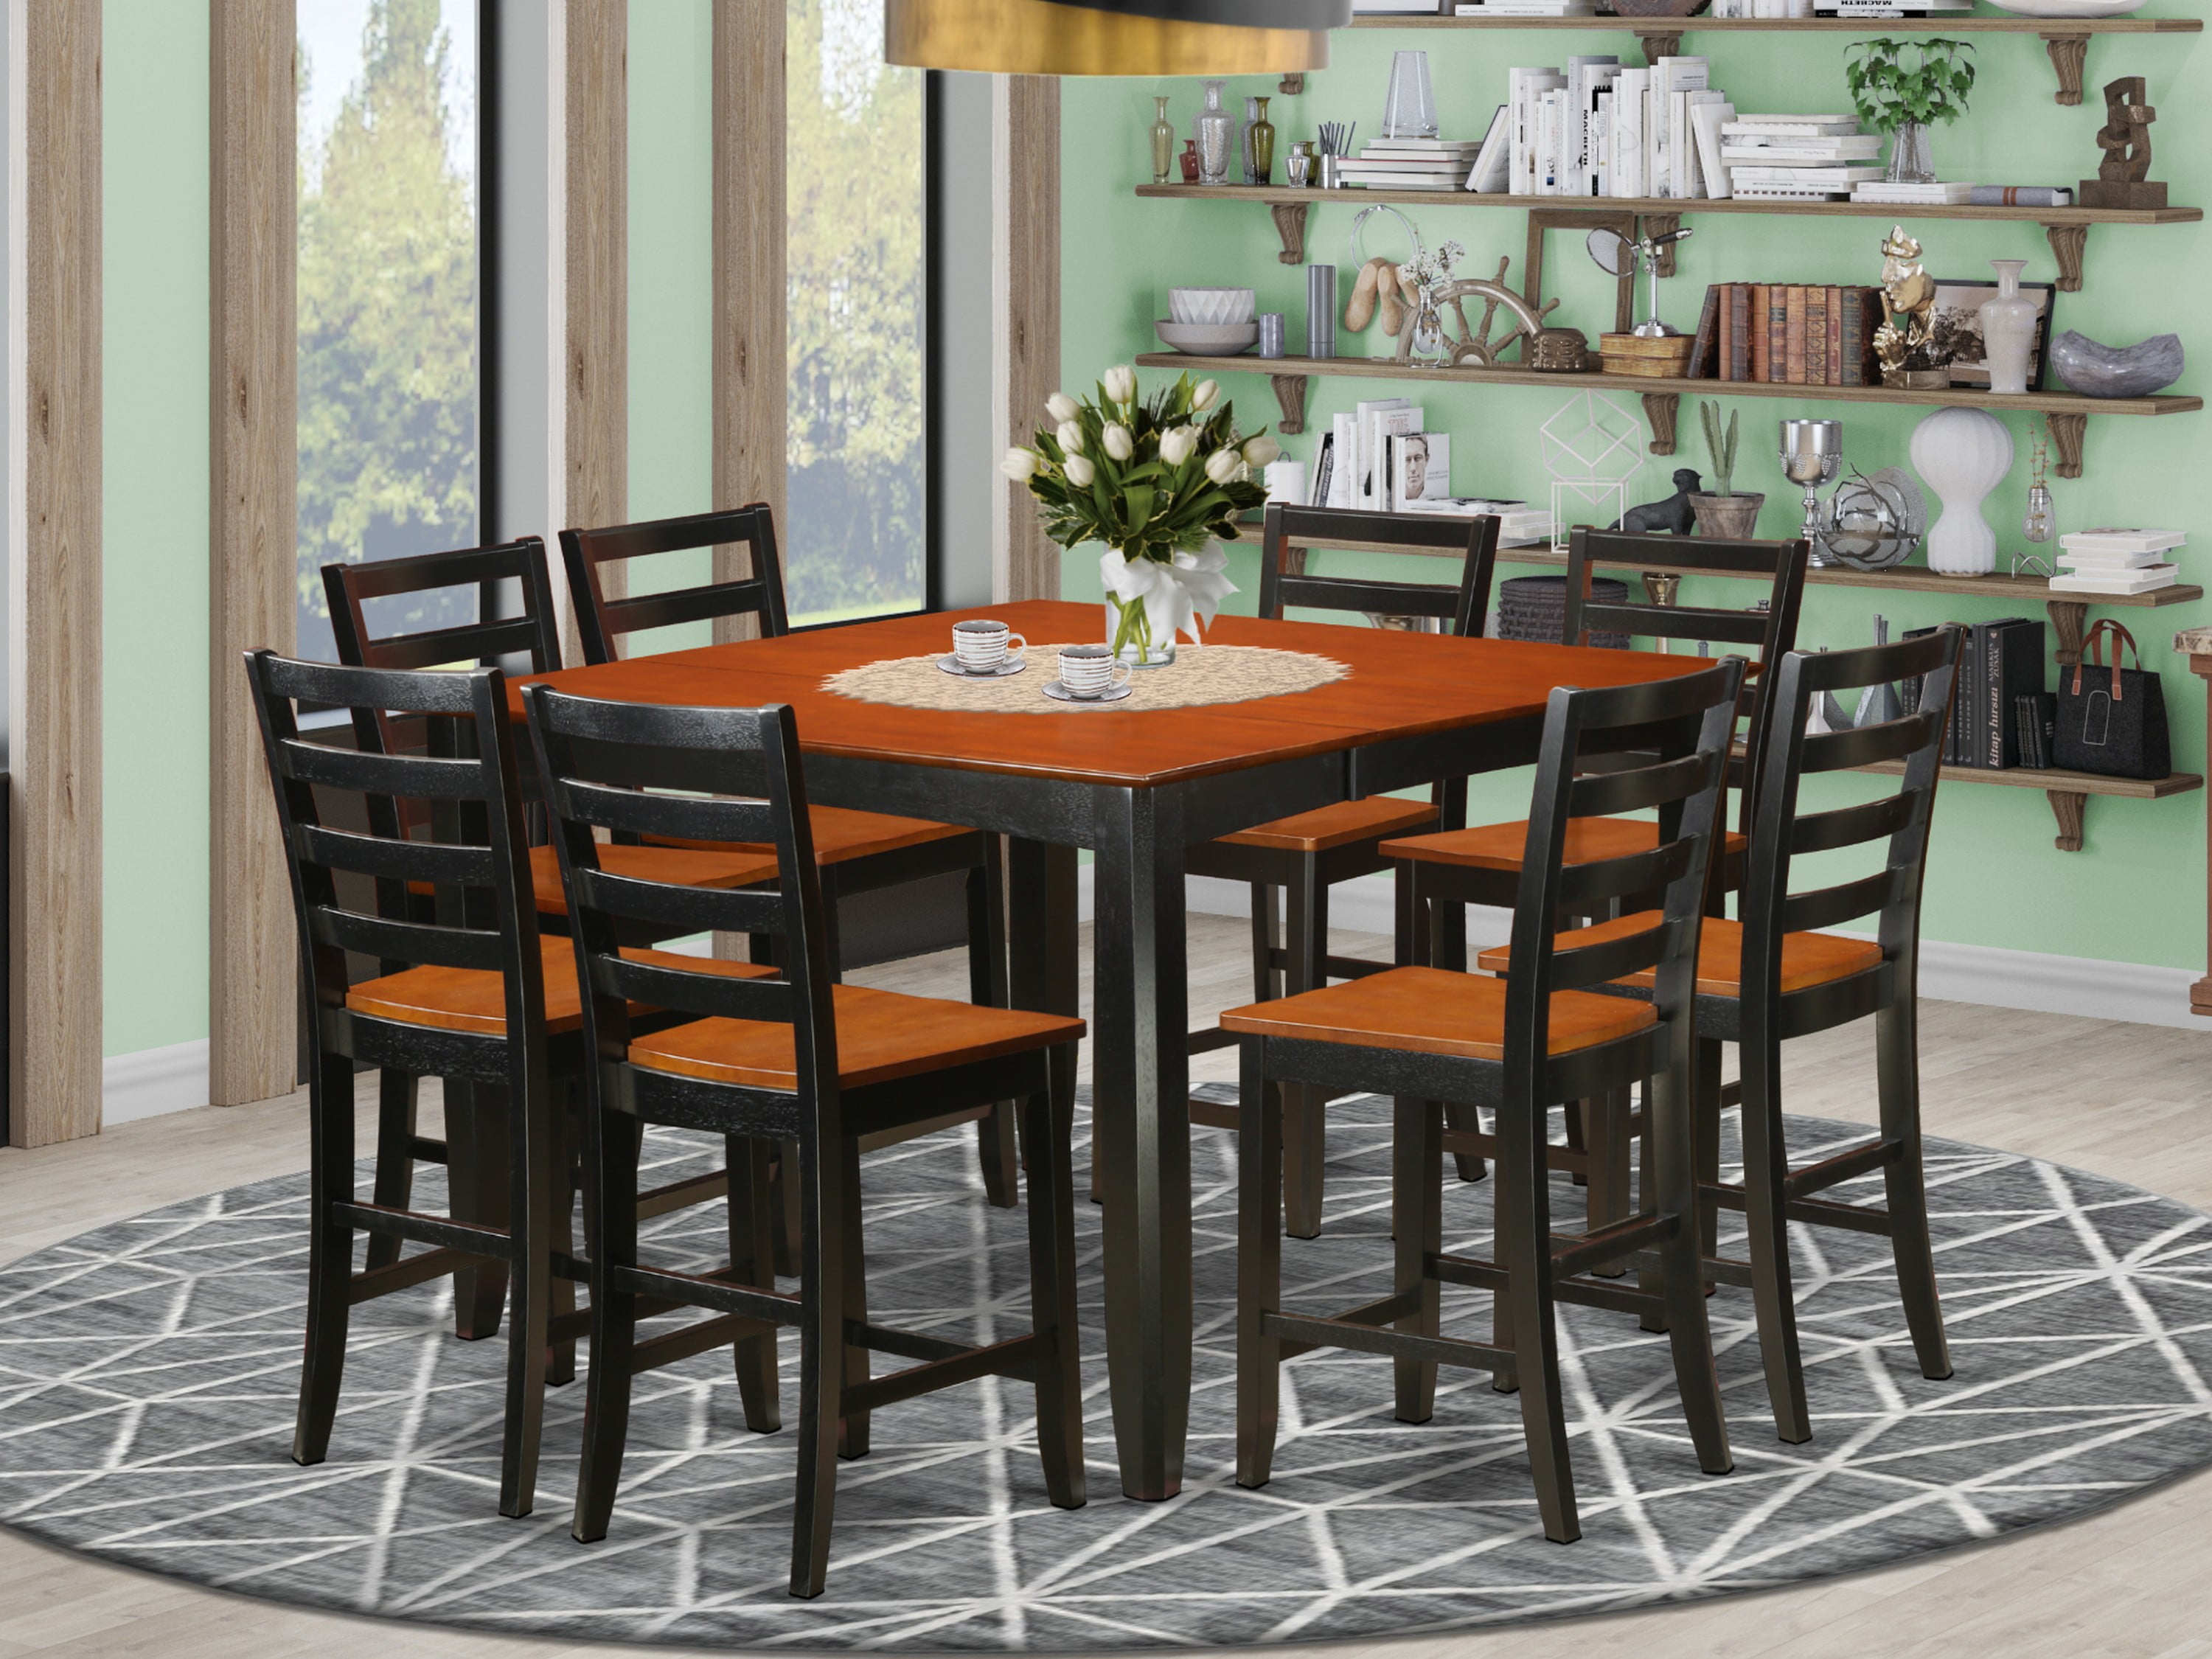 Fair9 Blk W 9 Pc Pub Table Set Square, Square Dining Room Table With 8 Chairs